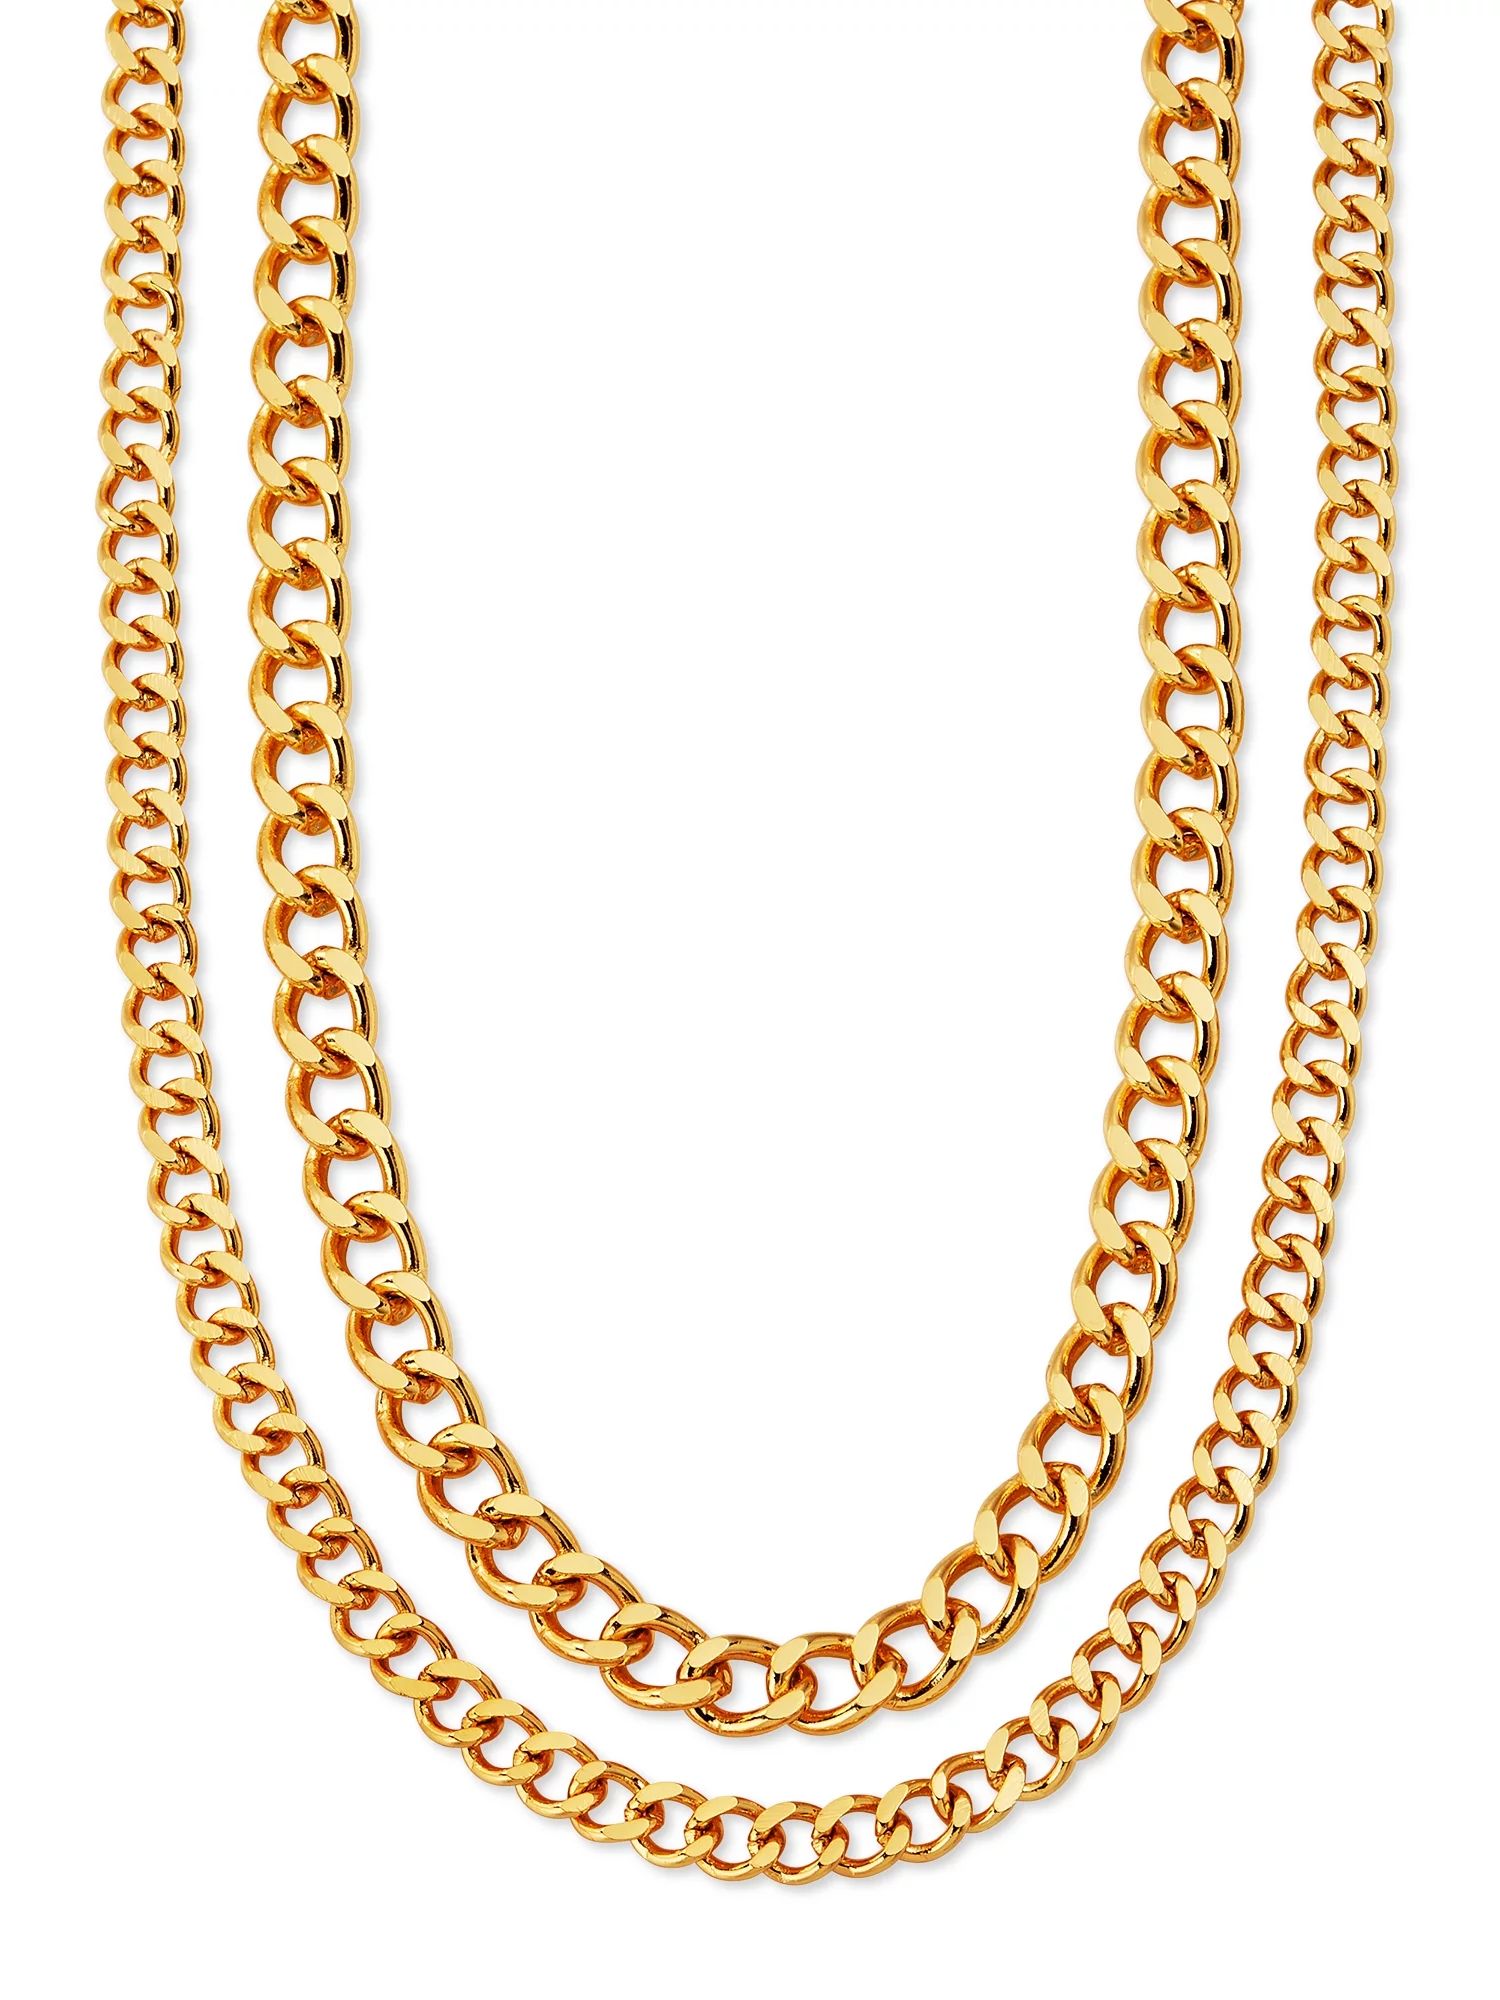 Scoop Brass Yellow Gold-Plated Layered Curb Chain Necklace, 14.5" + 4" Extender | Walmart (US)